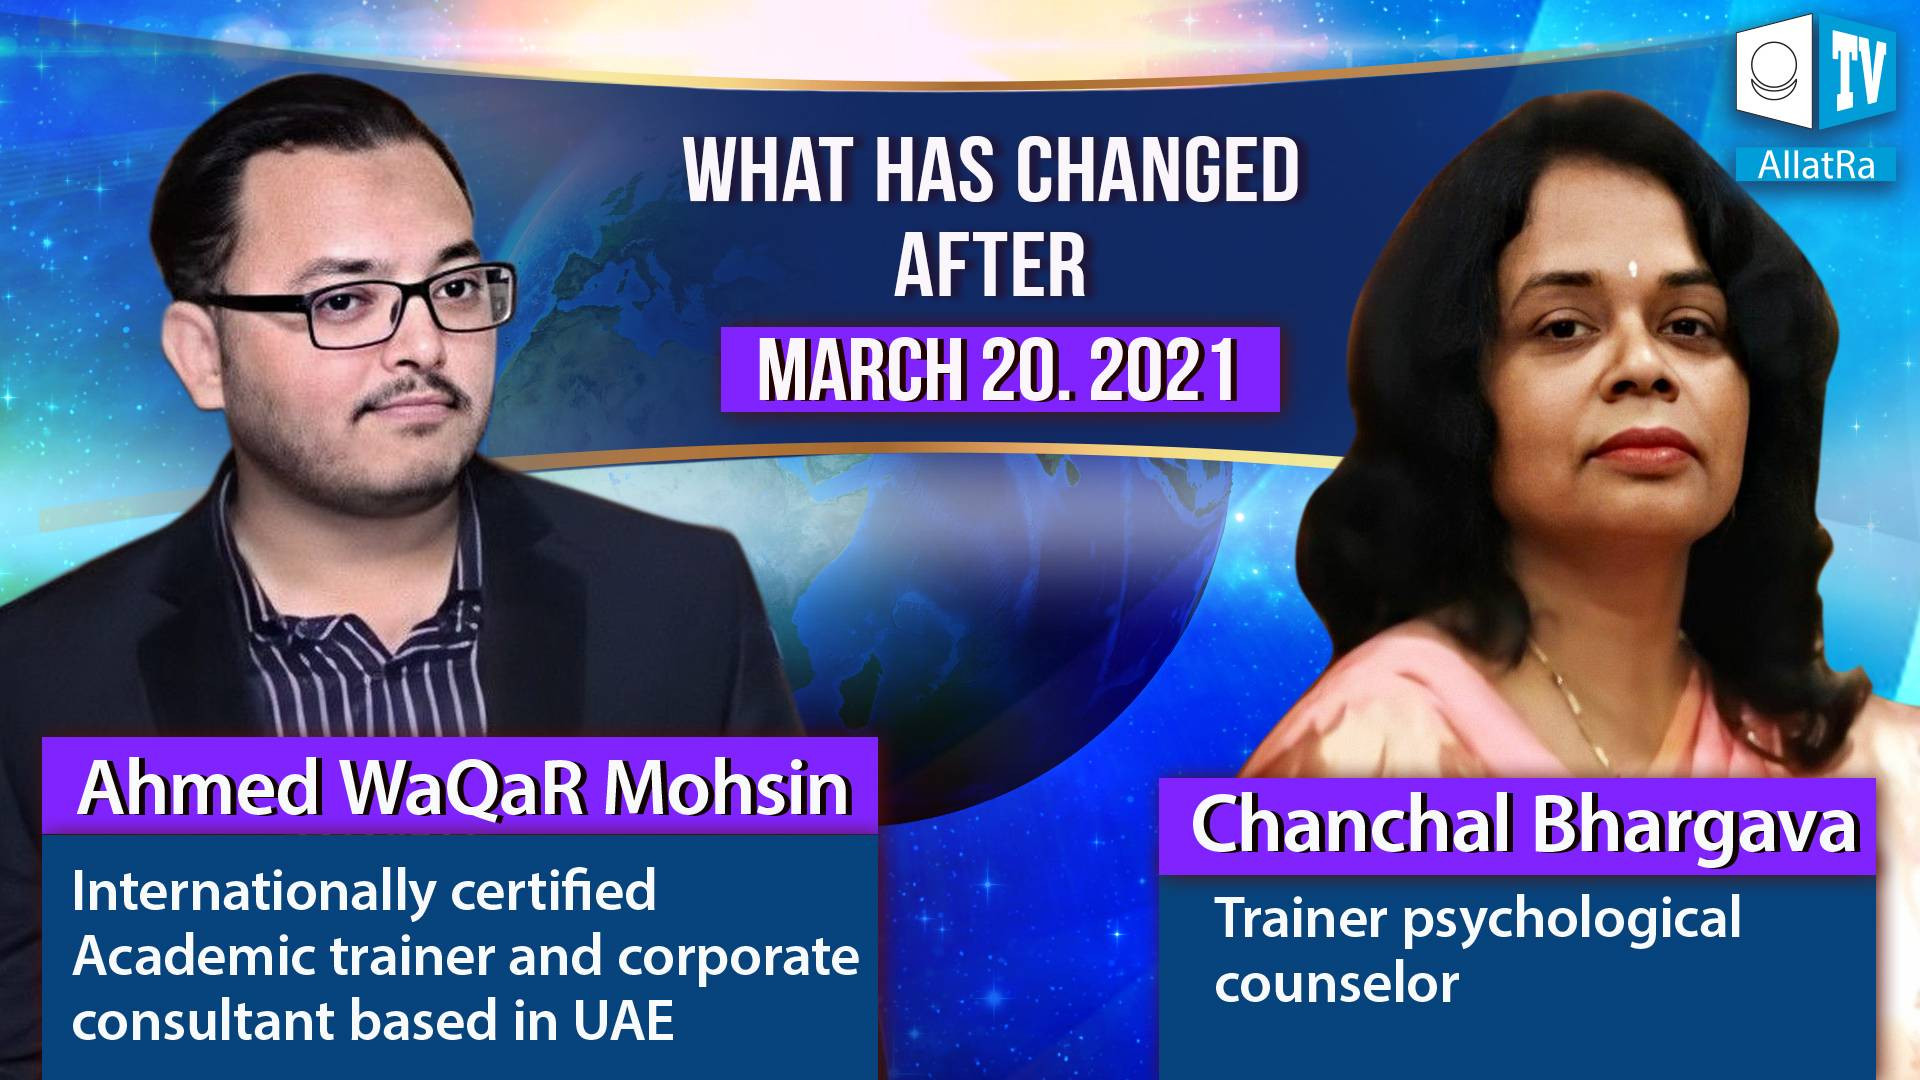 What has changed after March 20, 2021?